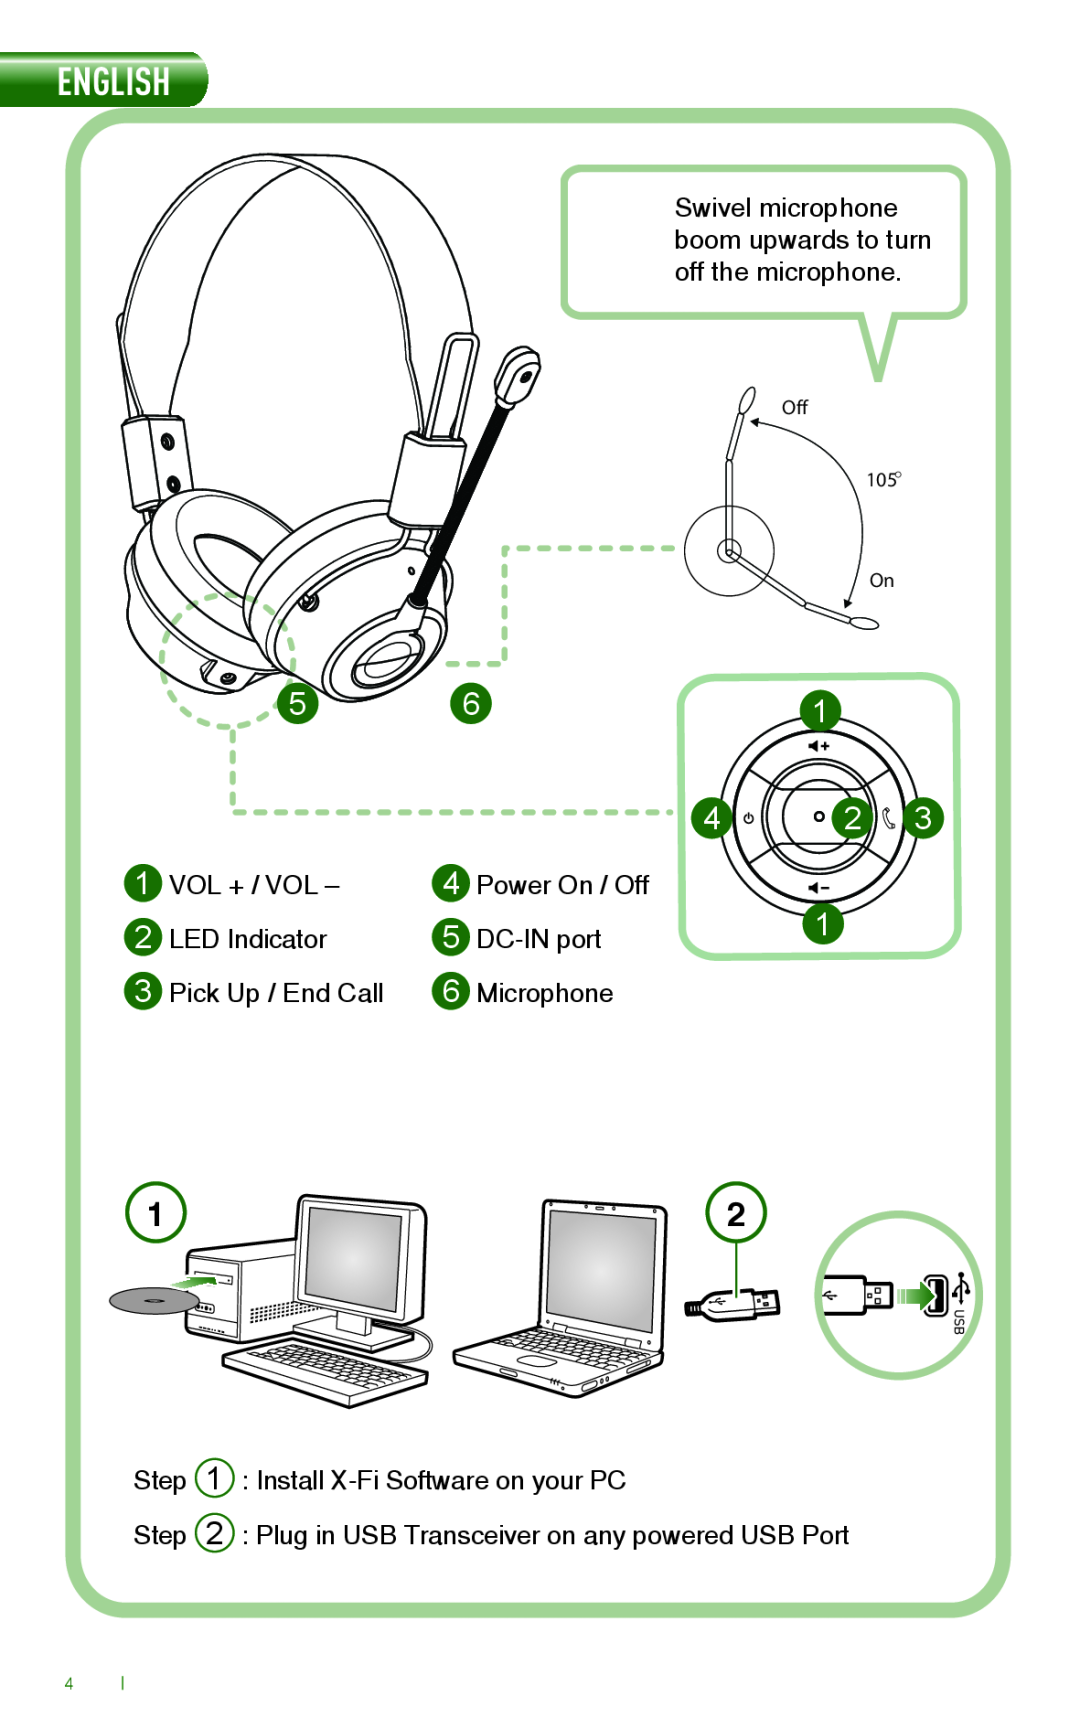 Creative HS-1200 Install X-FiSoftware on your PC, English, Swivel microphone, boom upwards to turn, Vol + / Vol, DC-INport 